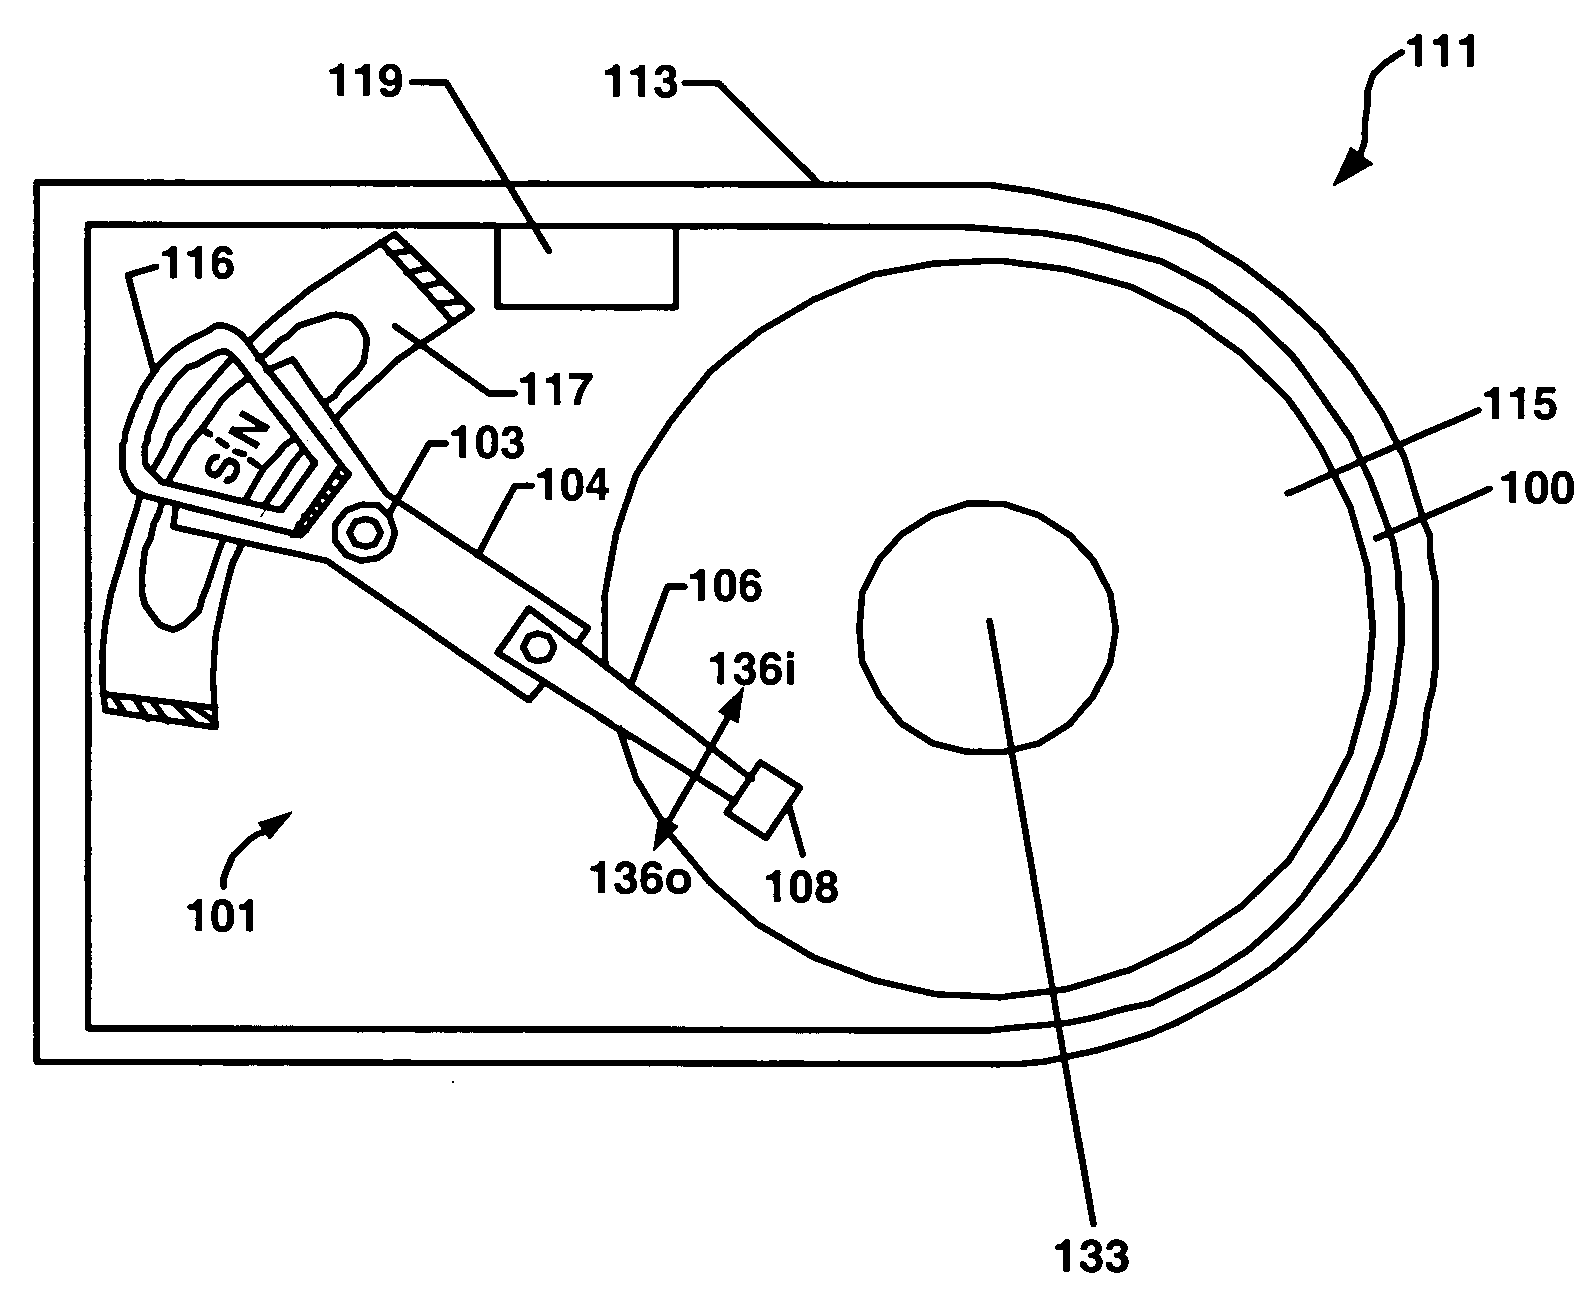 Method for detecting external acceleration to a hard disk drive by a spindle motor